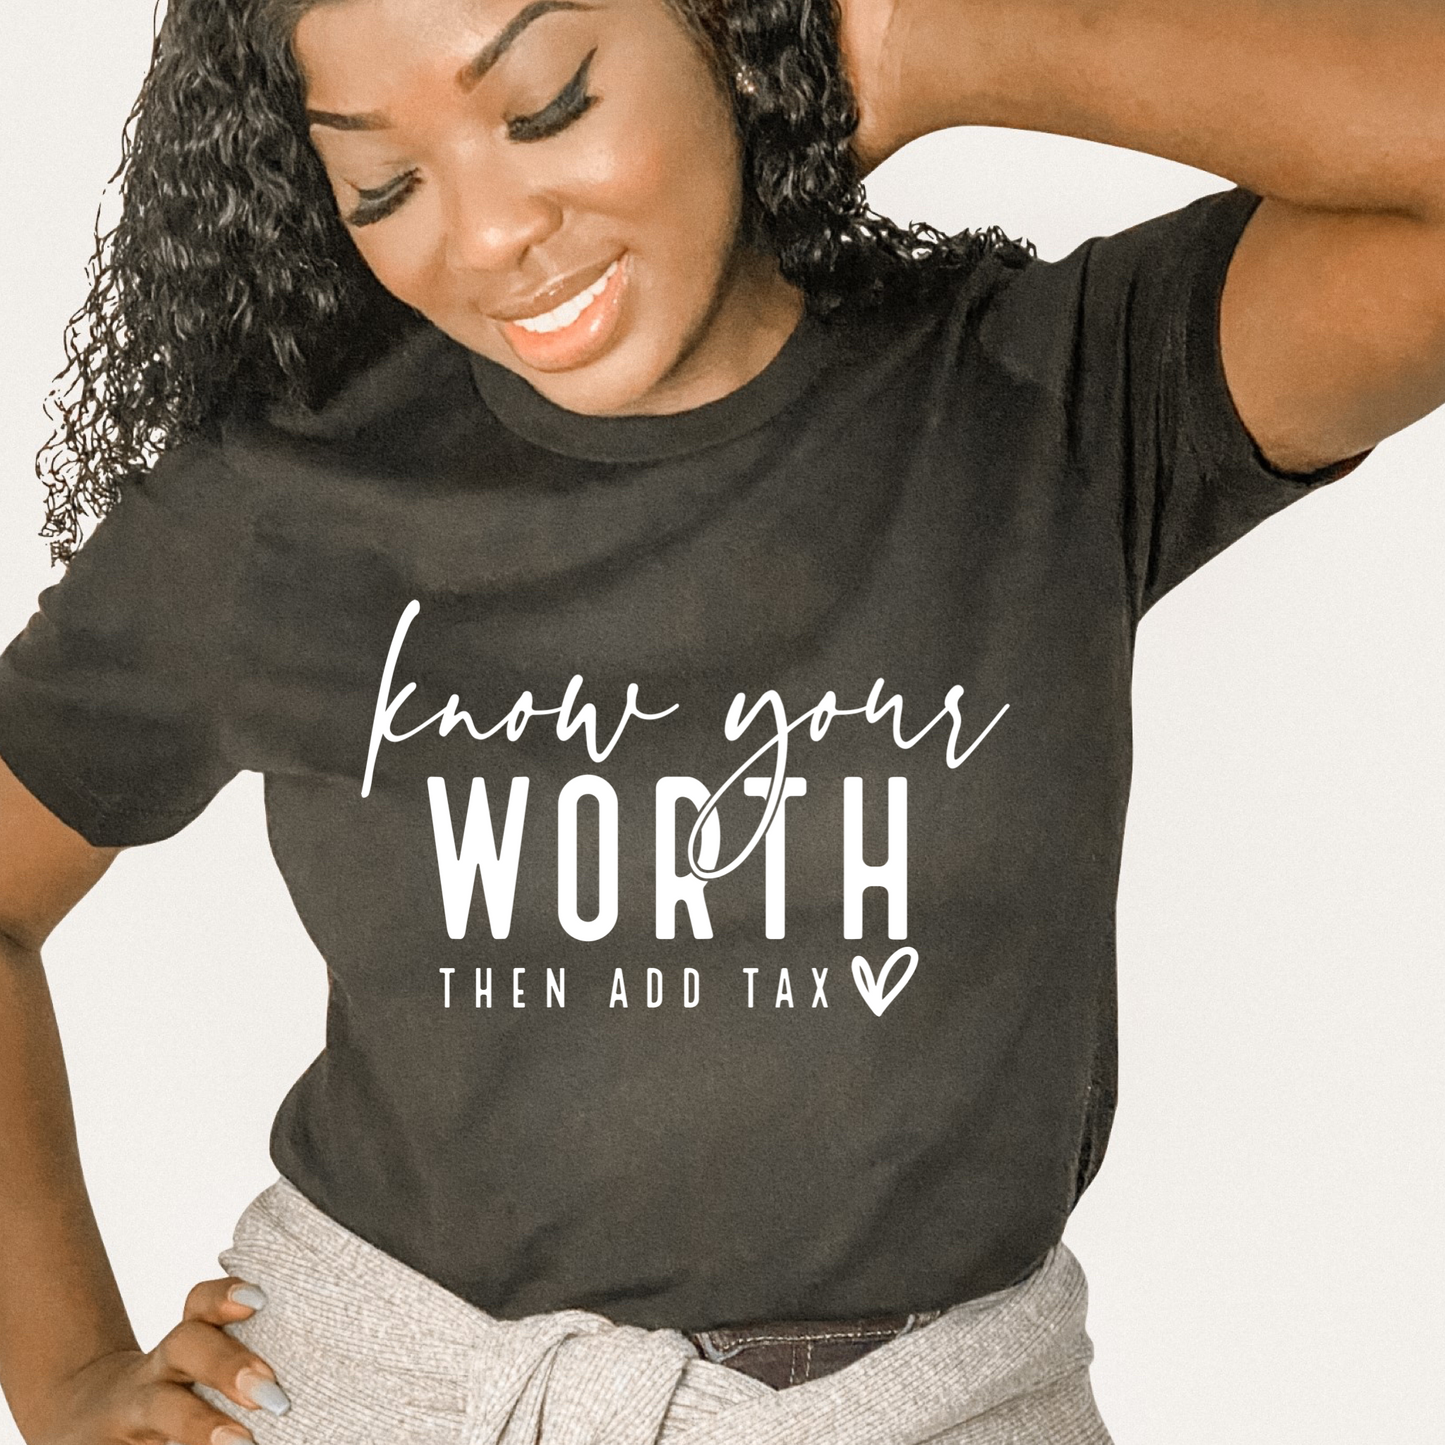 Know your worth then add tax black tee